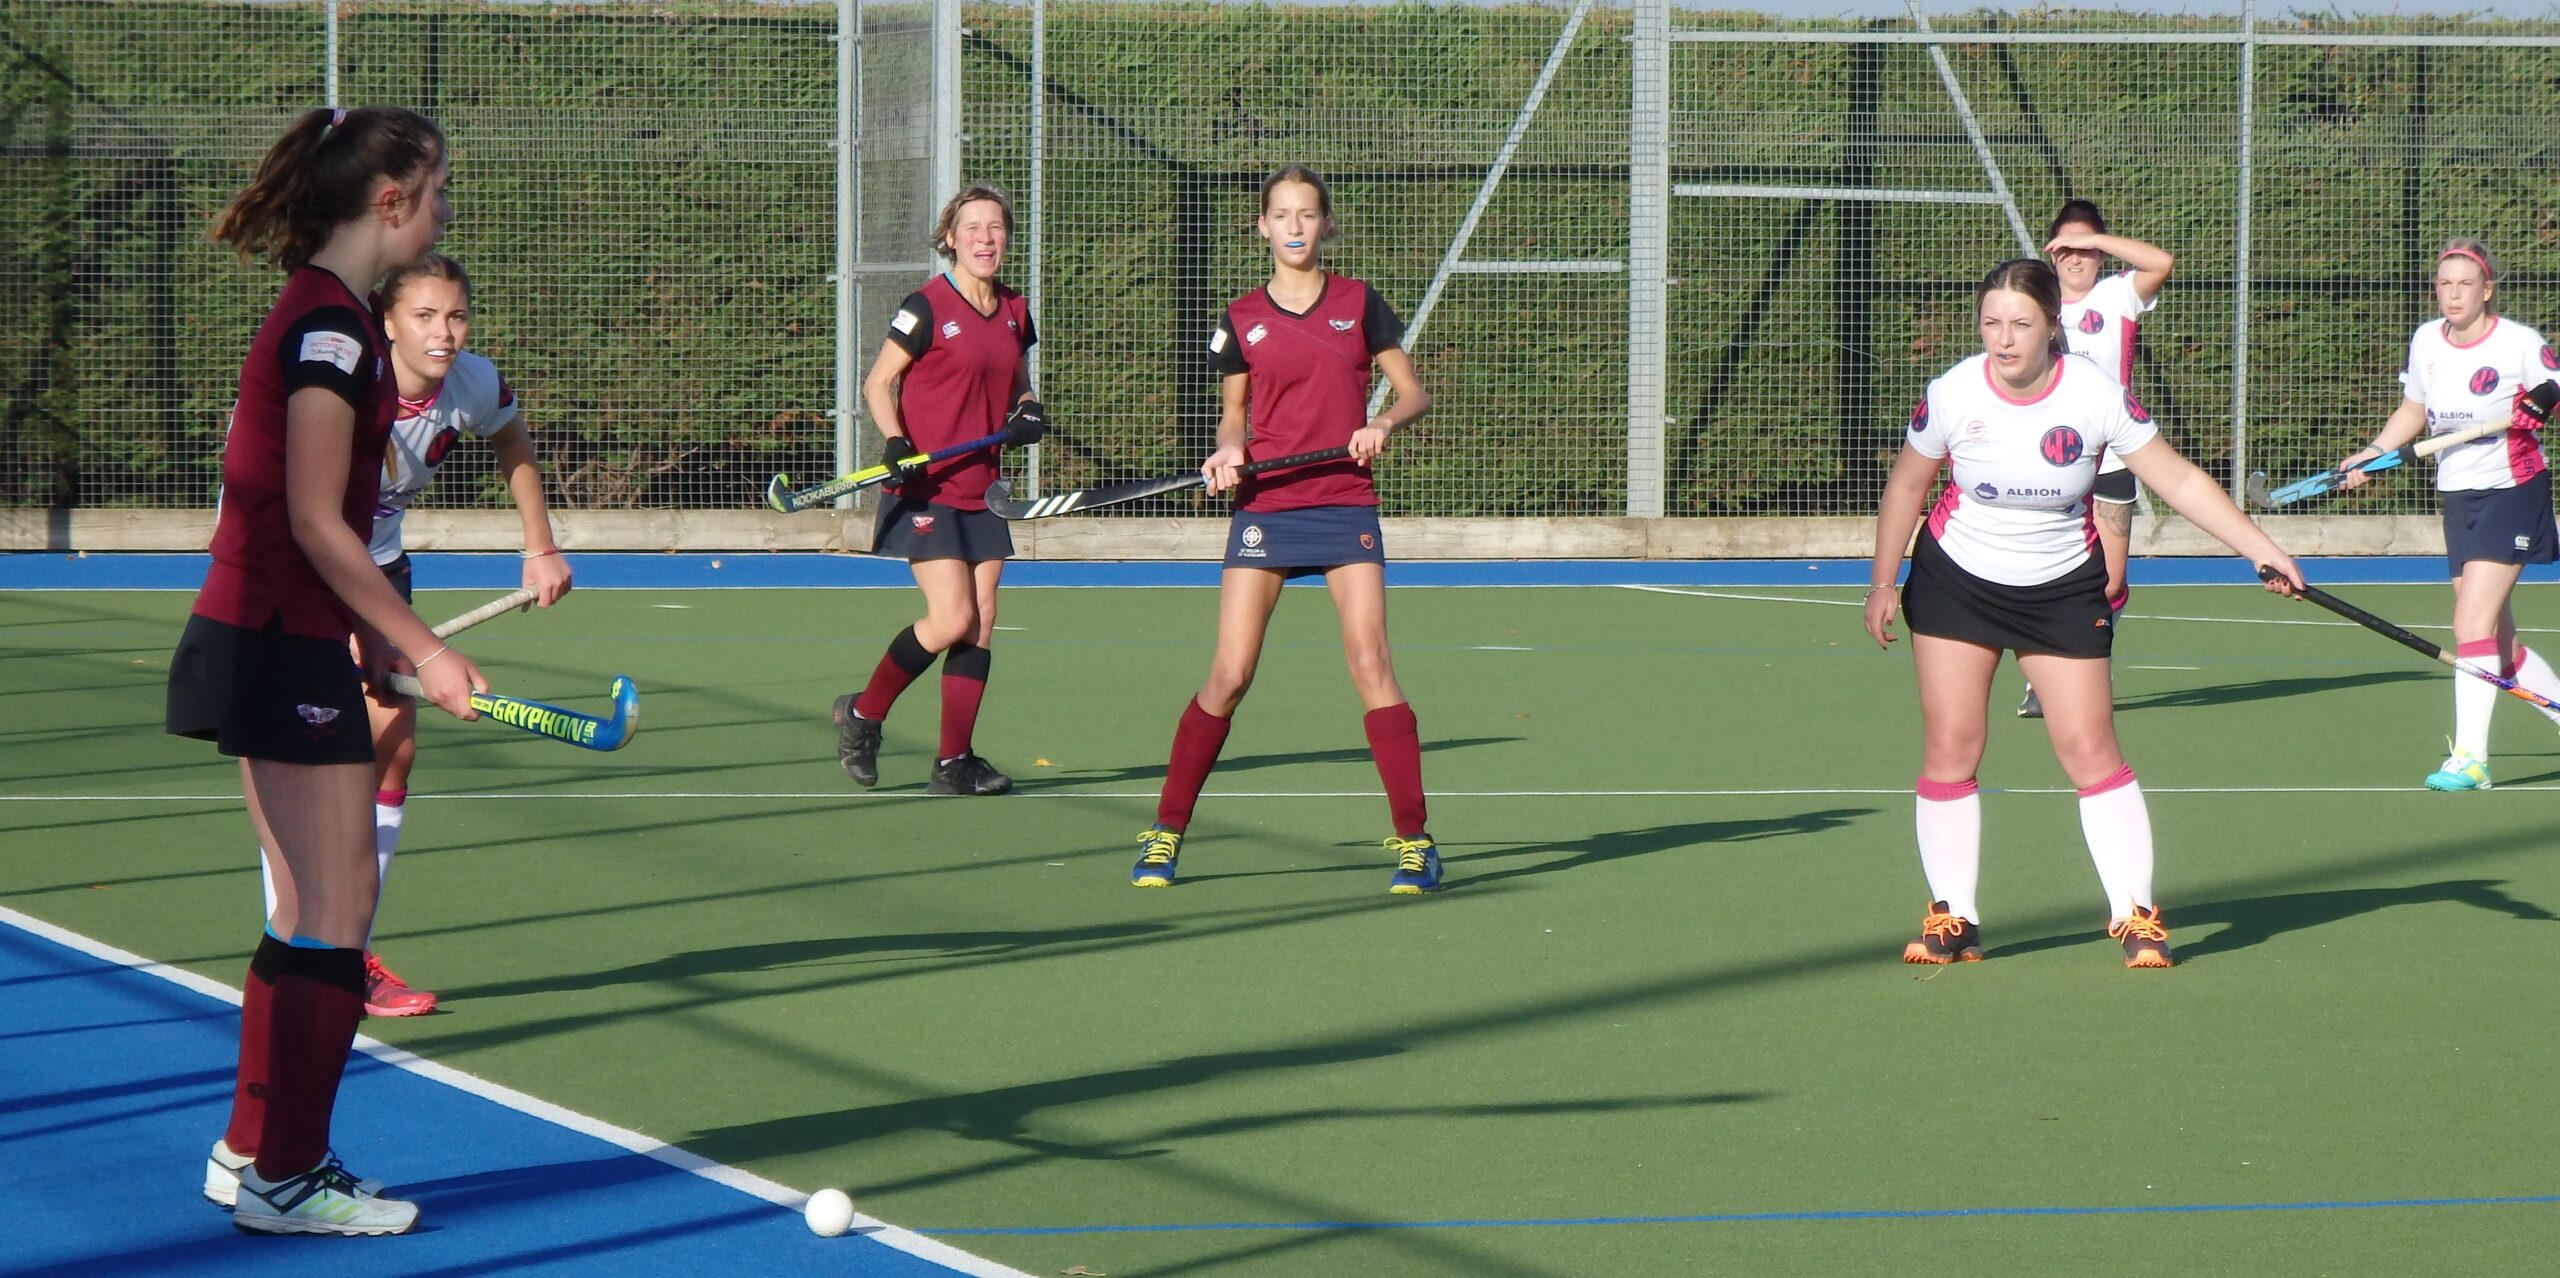 Ladies 6s play a game of two halves